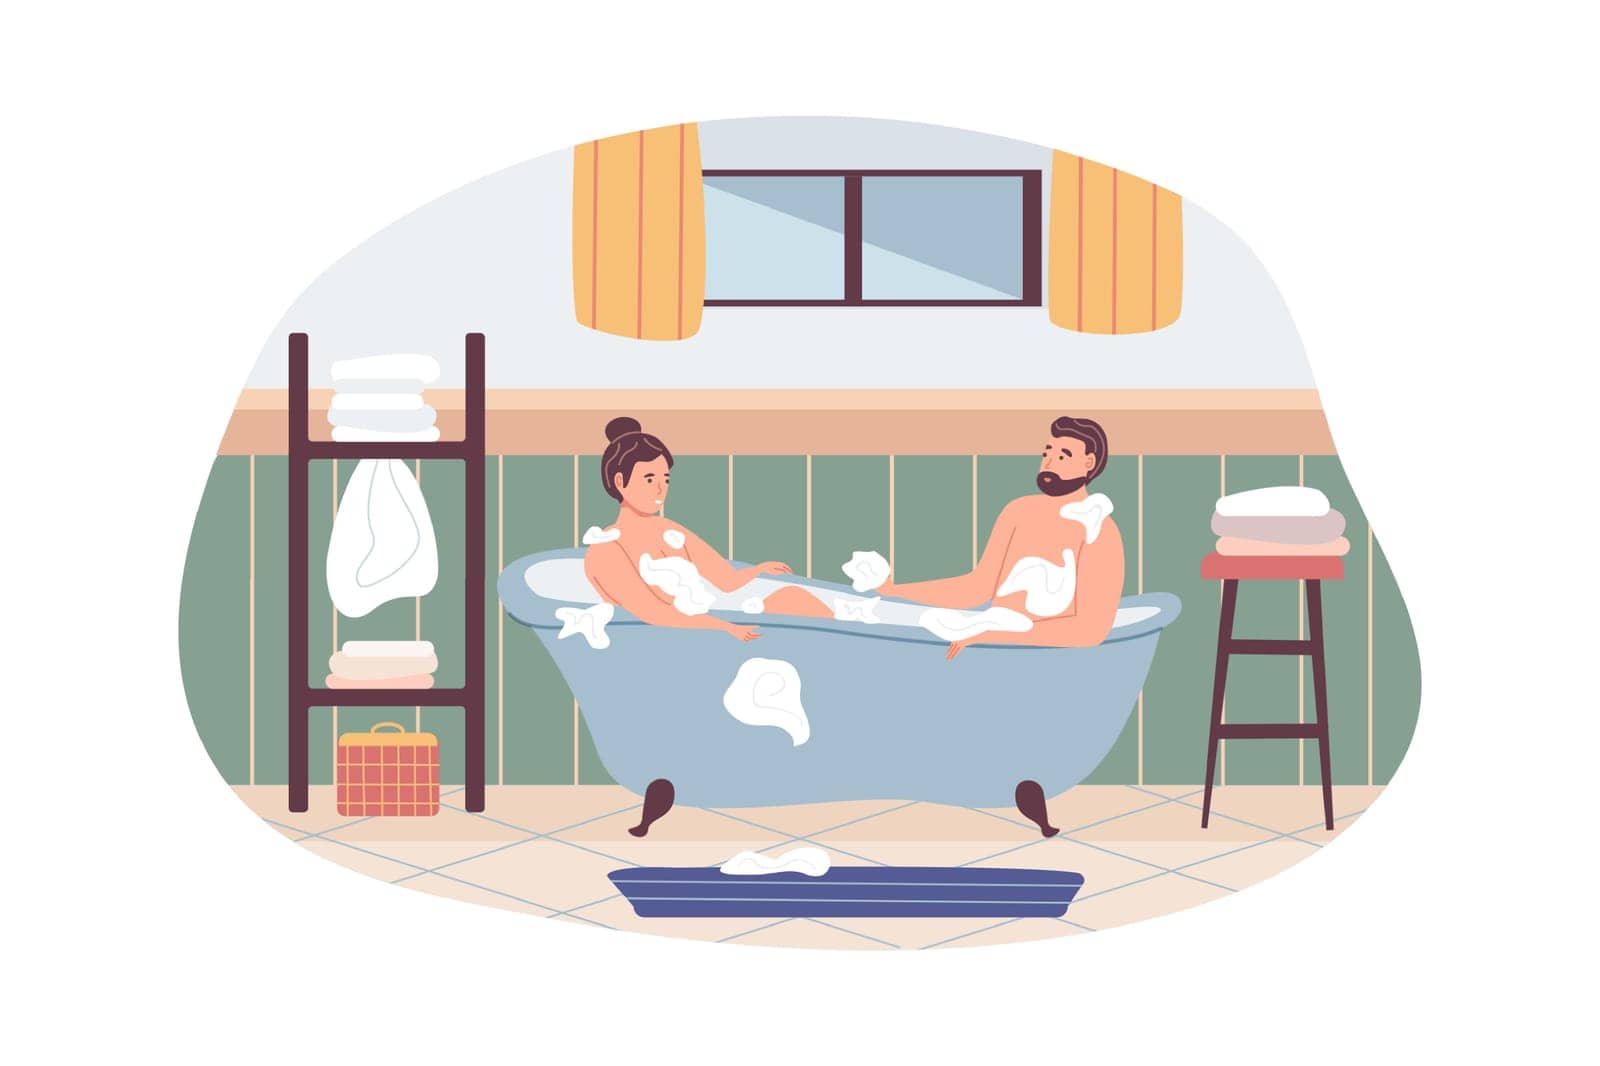 Everyday routine scene from the morning habit. A young woman and man take a bath. Everyday personal care, skincare daily routine, hygienic procedure. Flat cartoon vector illustration.